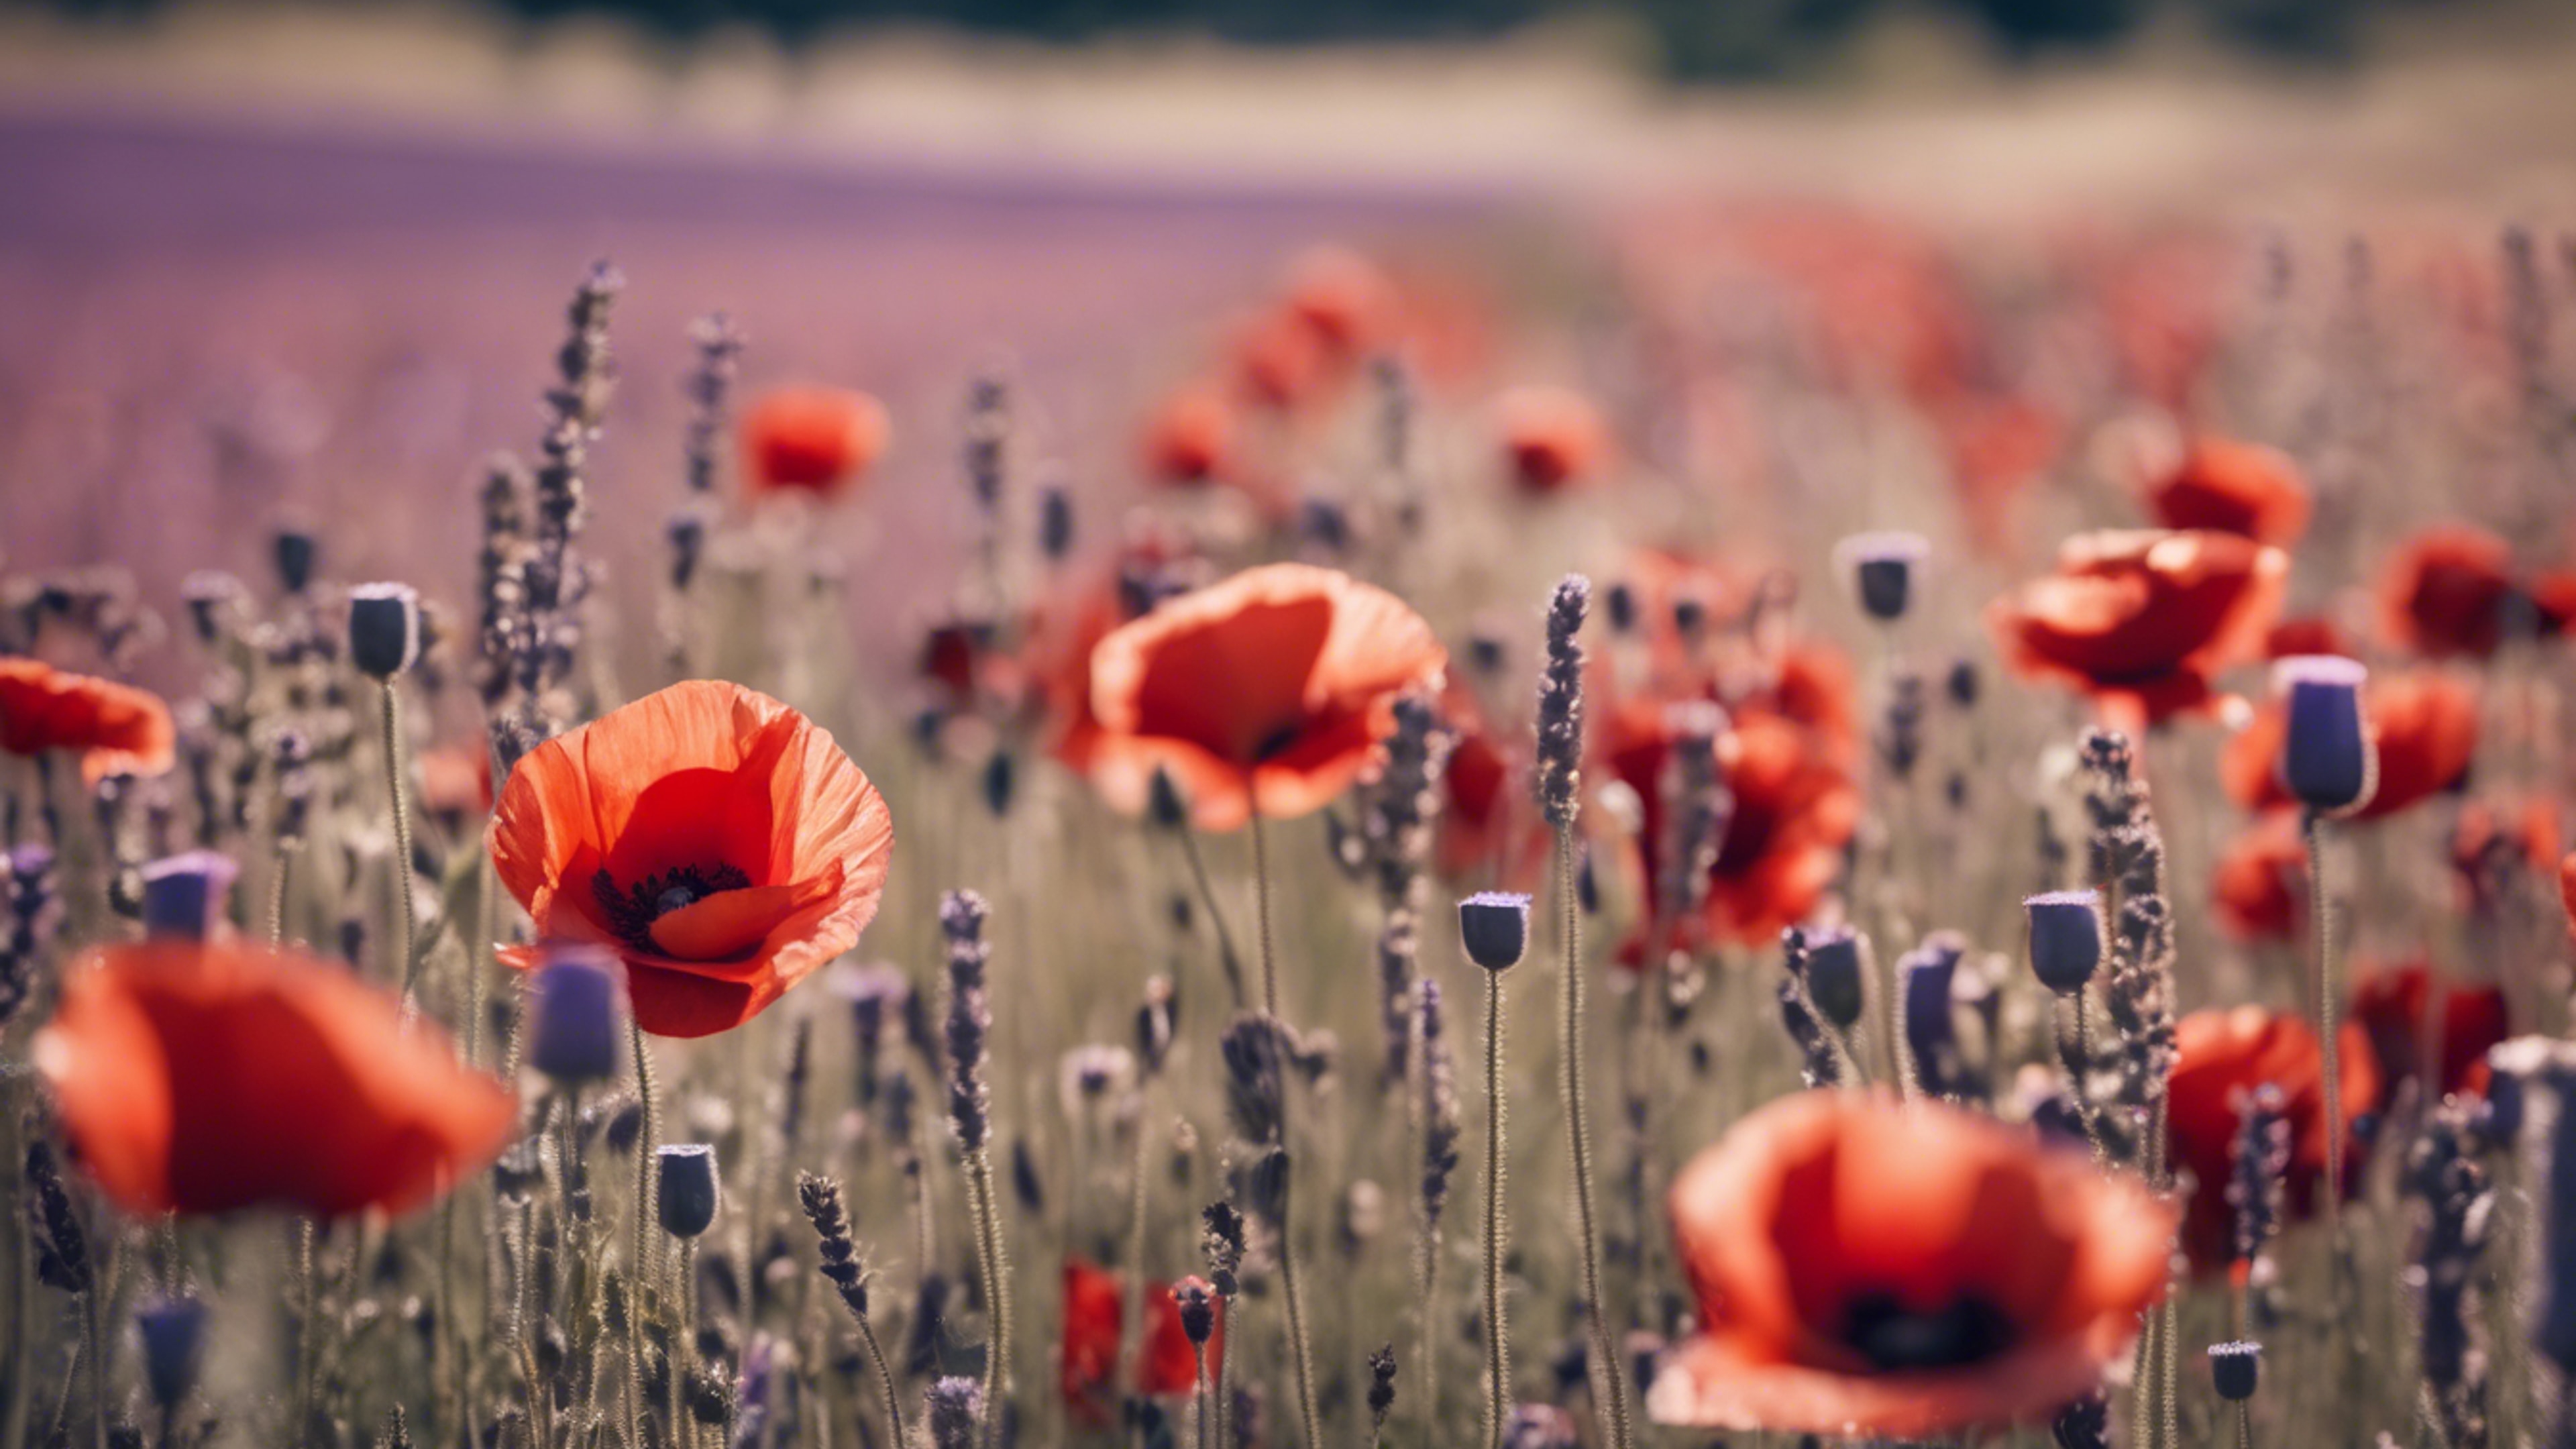 A field of red poppies naturally fading into a lavender field. Hintergrund[76e938c2507742cfb107]